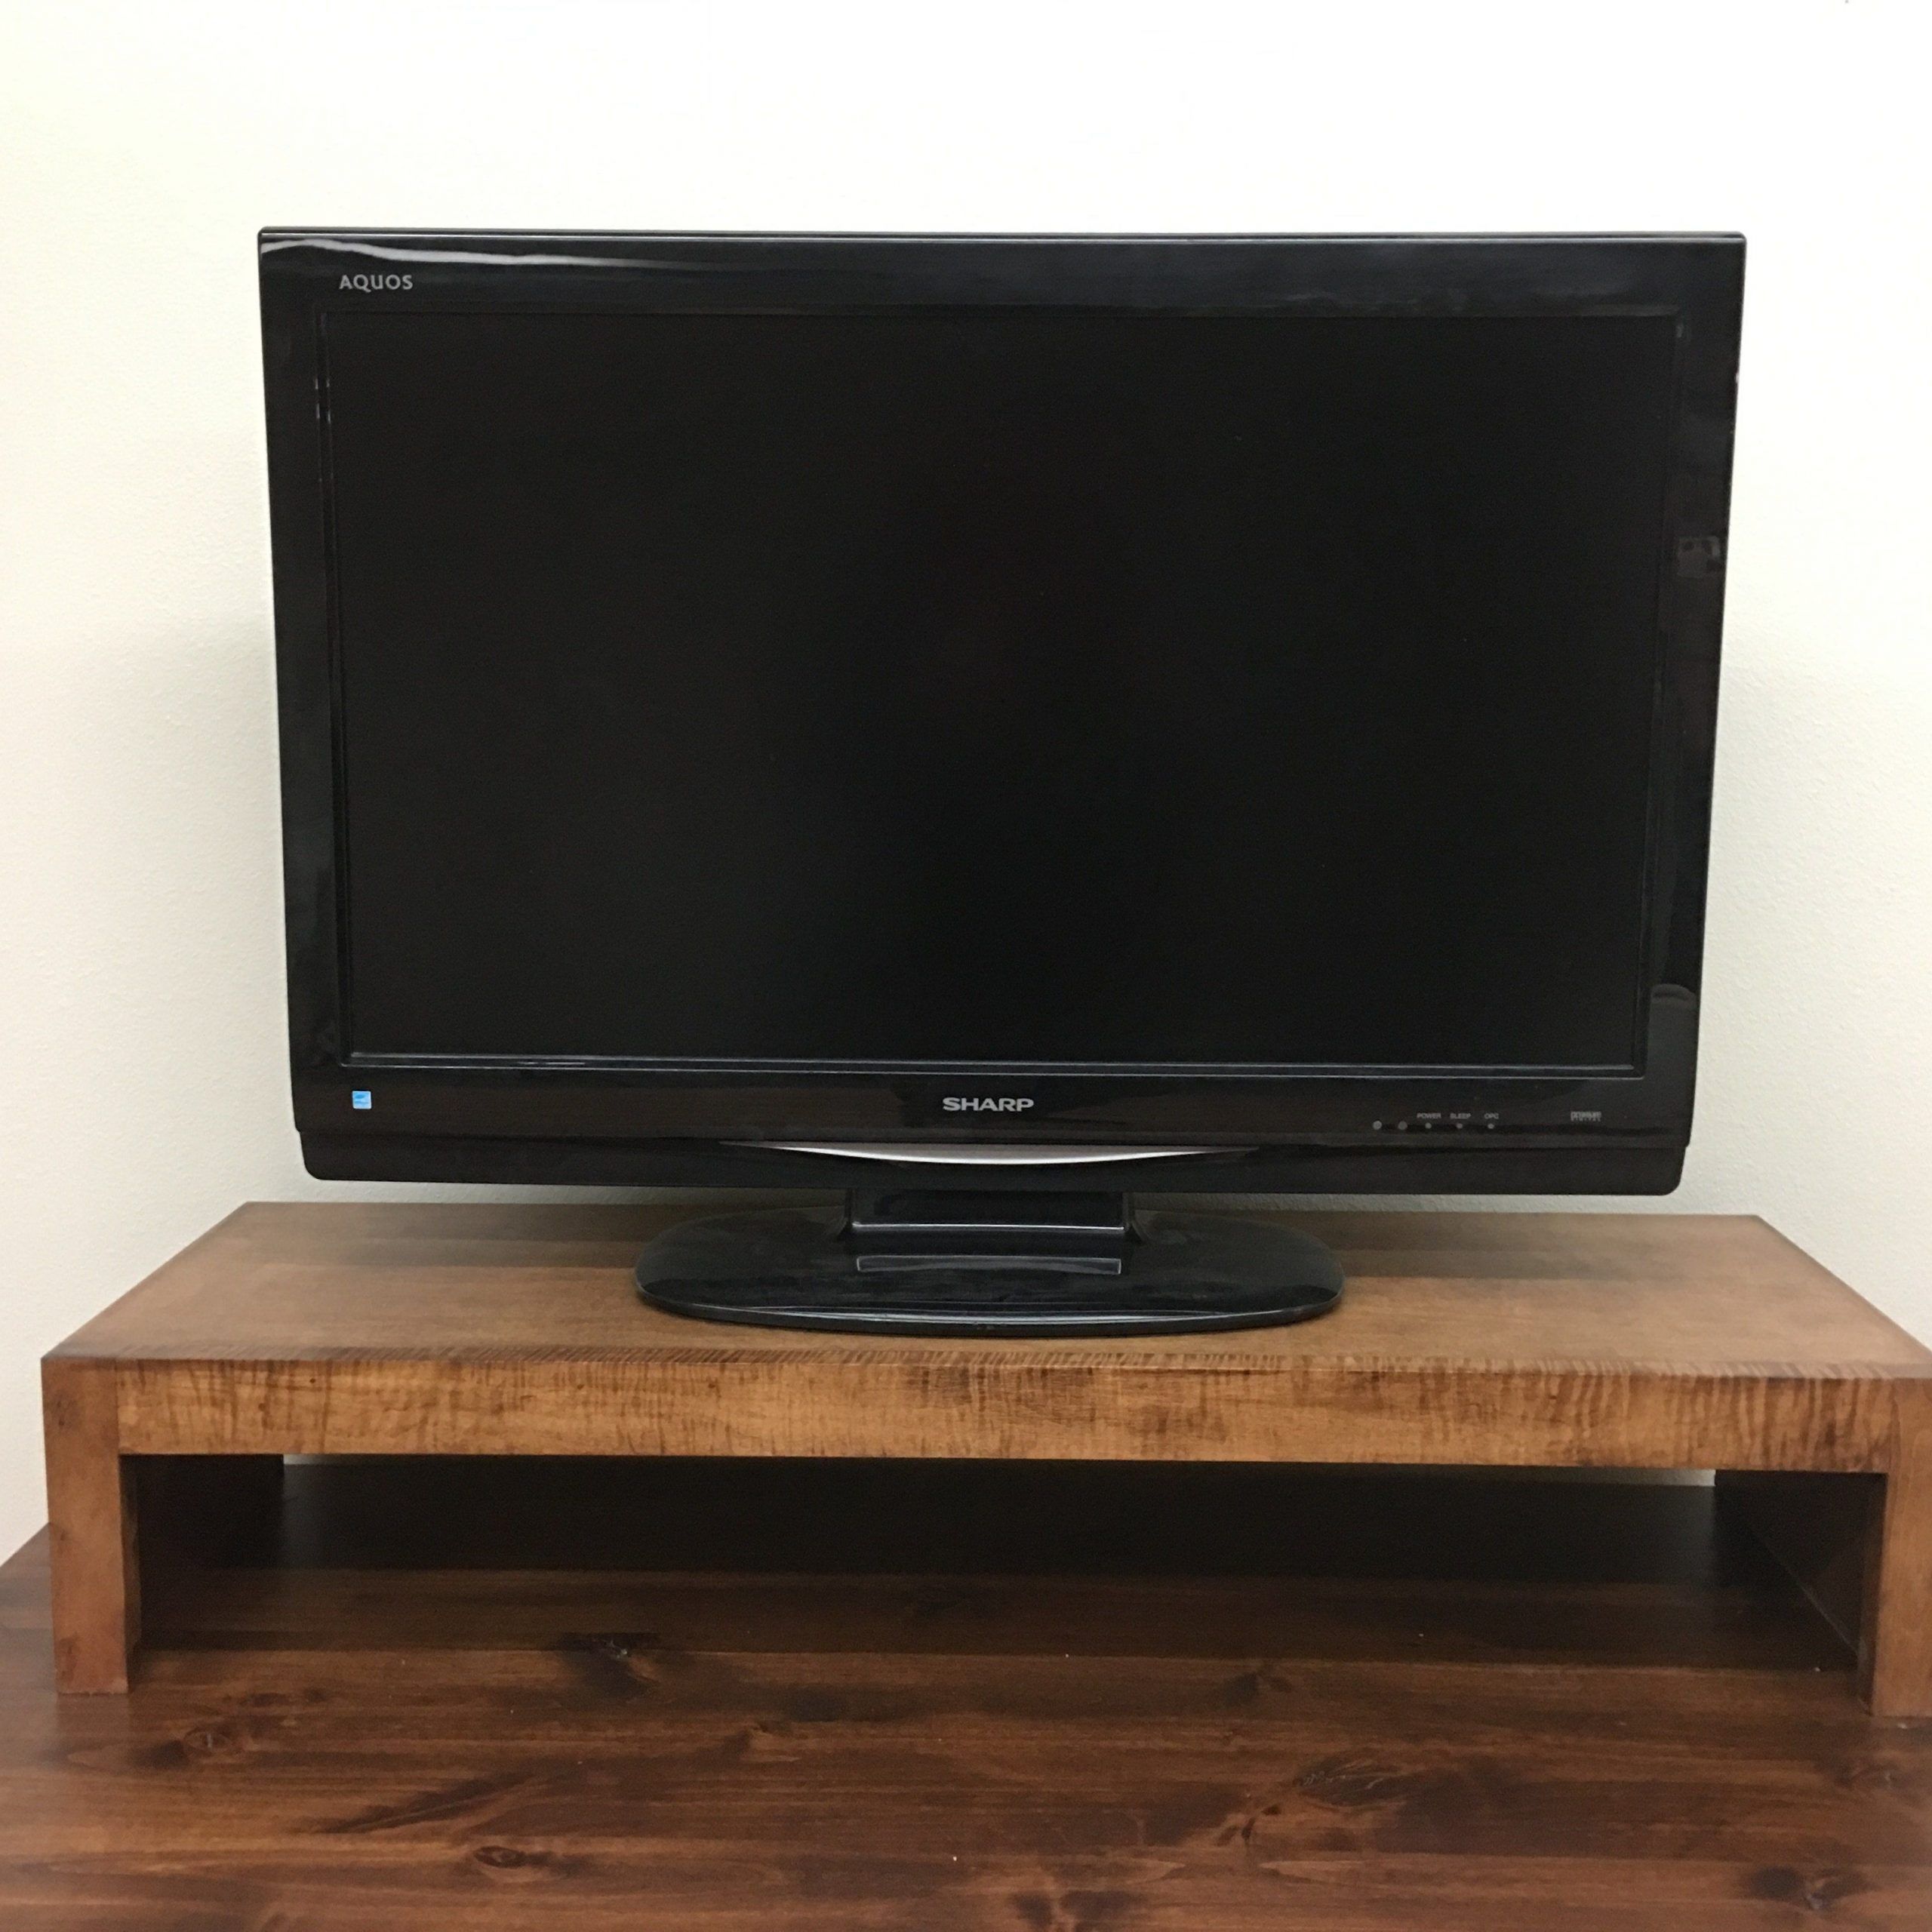 Led Modern Tv Riser Stands In Maple | Tv Riser, Rustic Intended For Tv Riser Stand (View 2 of 15)